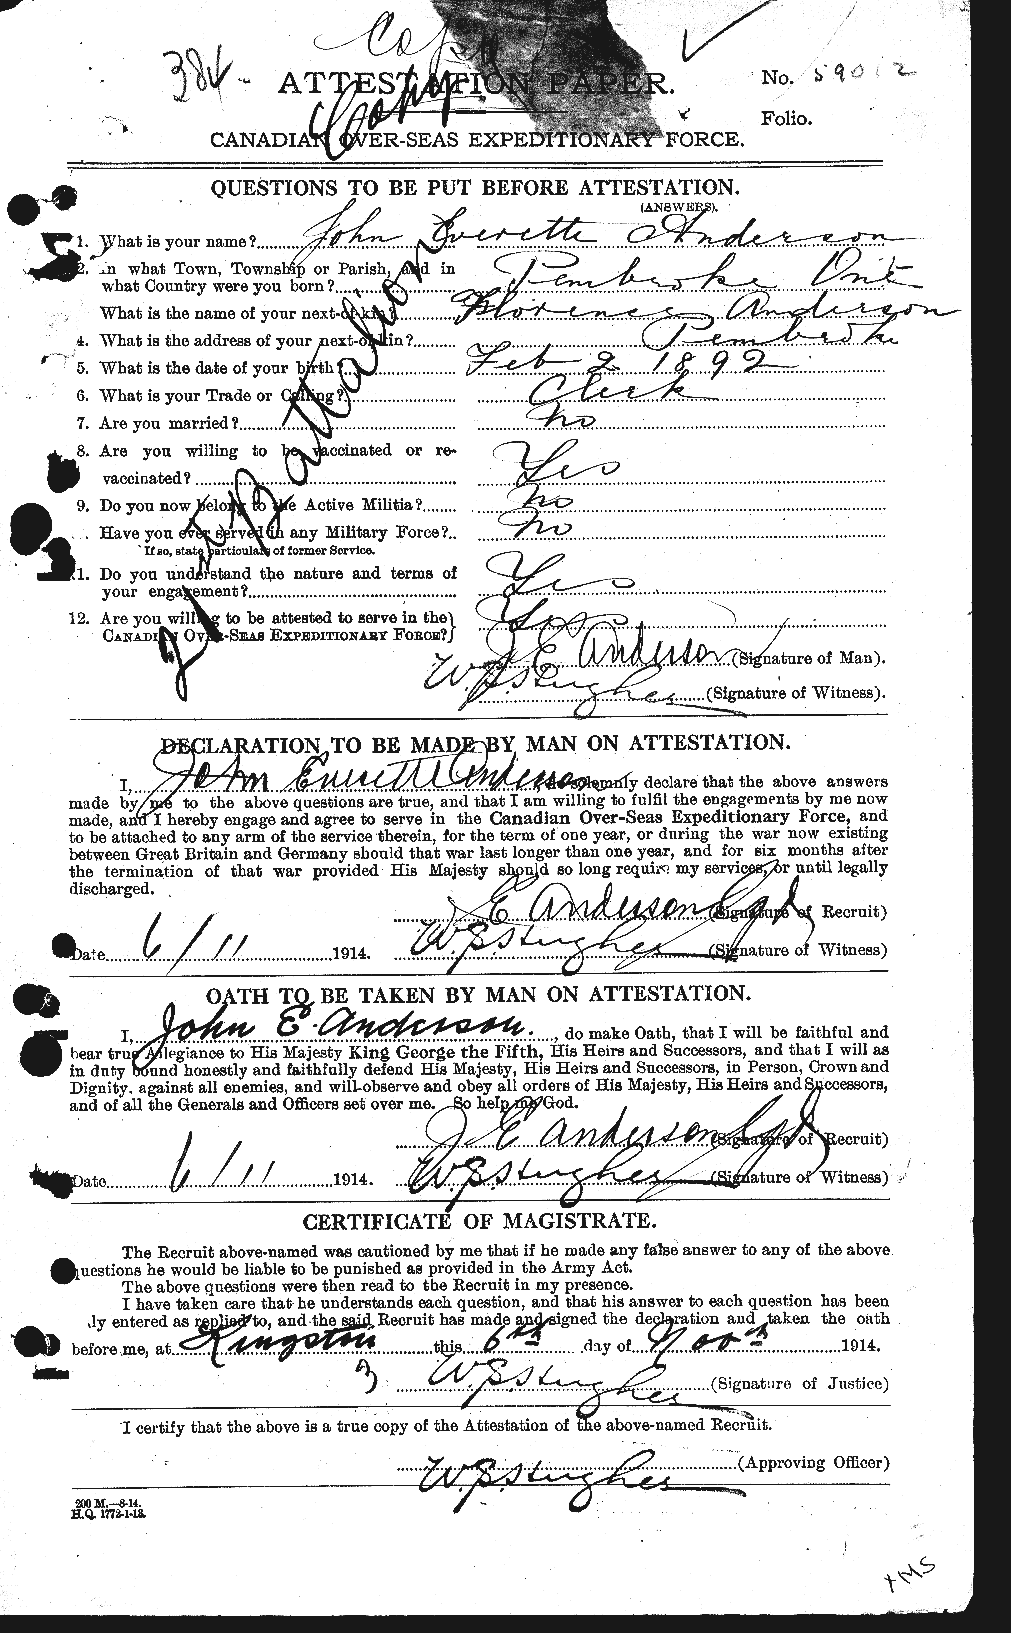 Personnel Records of the First World War - CEF 207666a